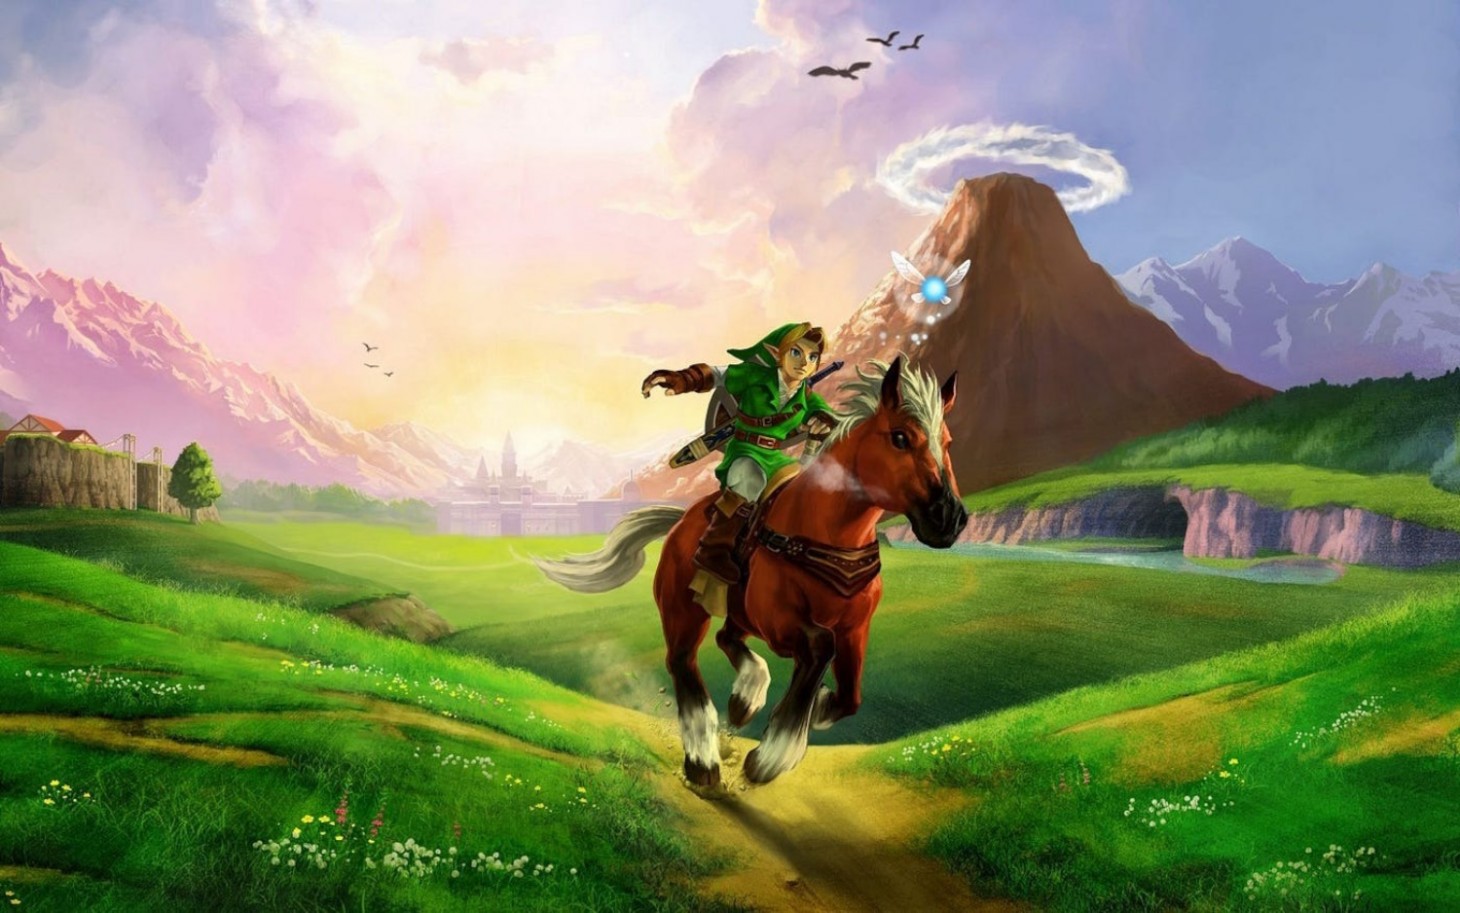 Nintendo announces a live-action 'LEGEND OF ZELDA' movie is in the works.  Wes Ball to direct with Avi Arad is set to produce for Sony.